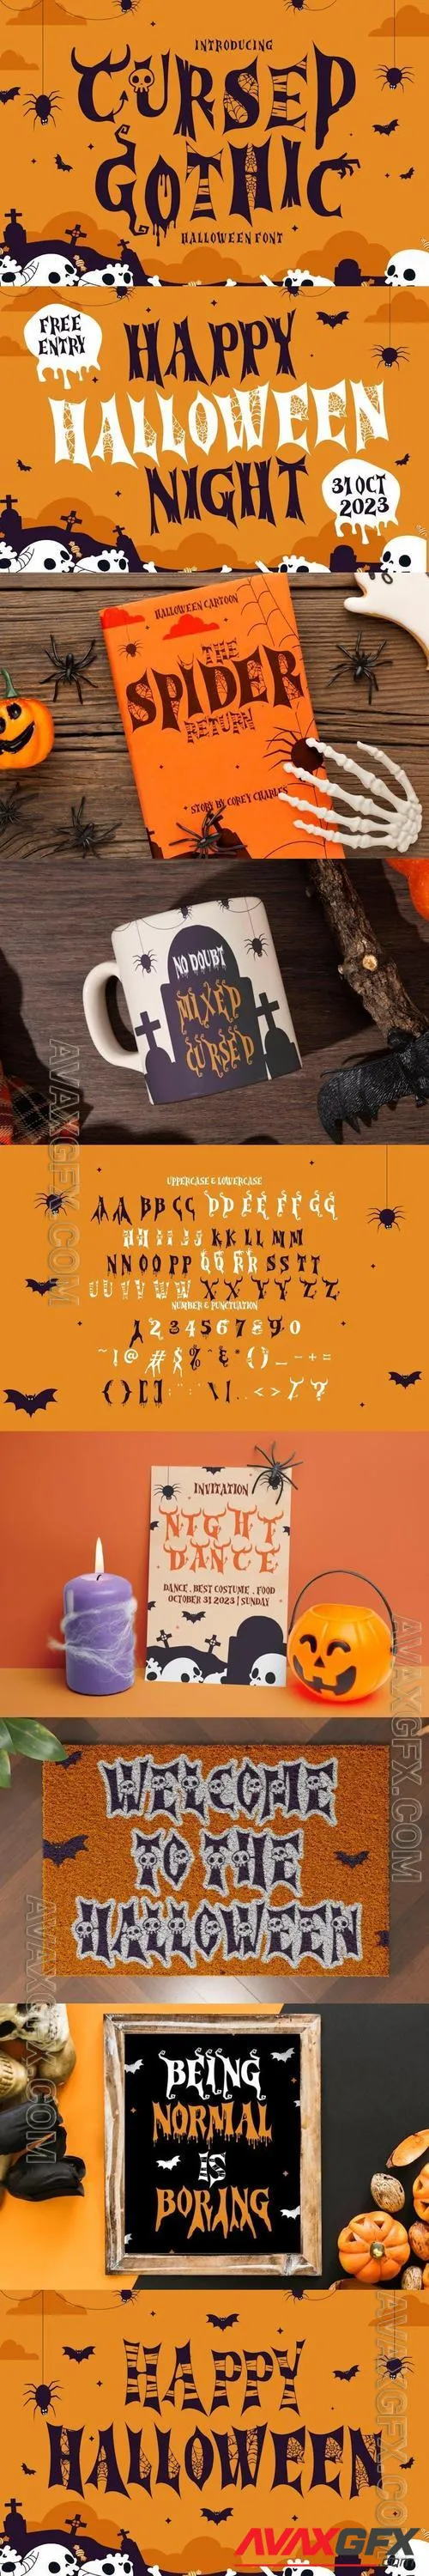 Cursed Gothic - Halloween Font